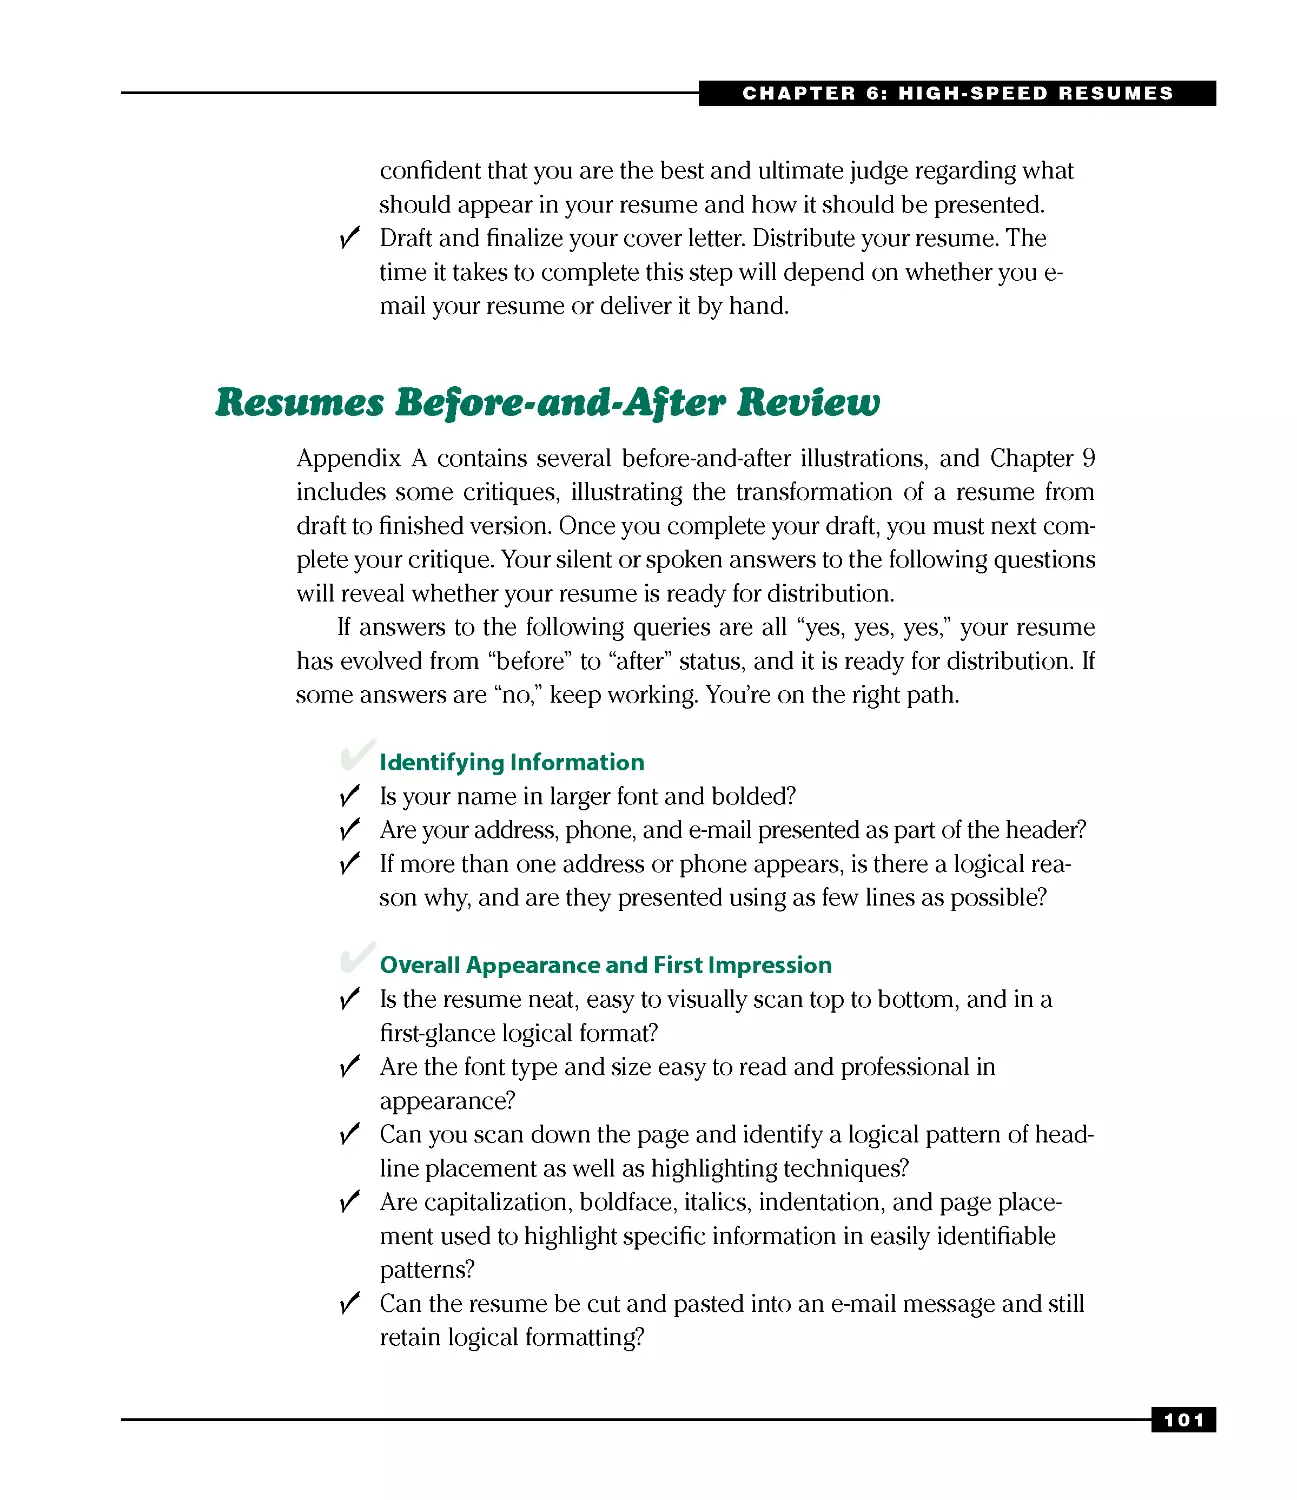 Resumes Before-and-After Review